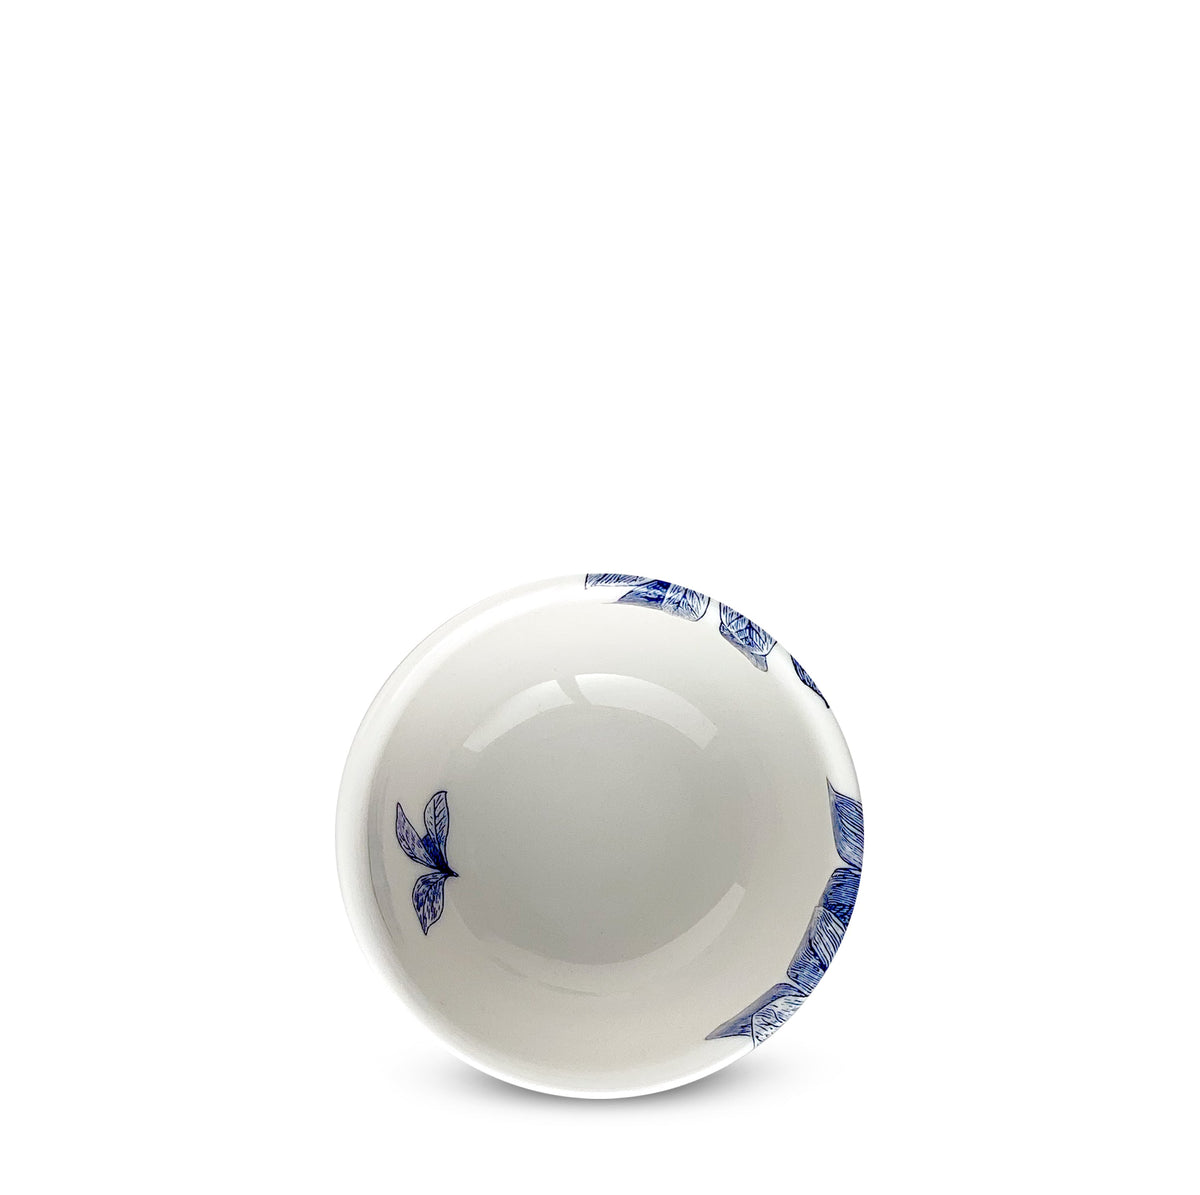 A small white ceramic bowl with blue floral designs on the rim, featuring butterflies and leafy branches. The Arbor Snack Bowl from Caskata Artisanal Home is dishwasher and microwave safe and is centered empty against a white background.